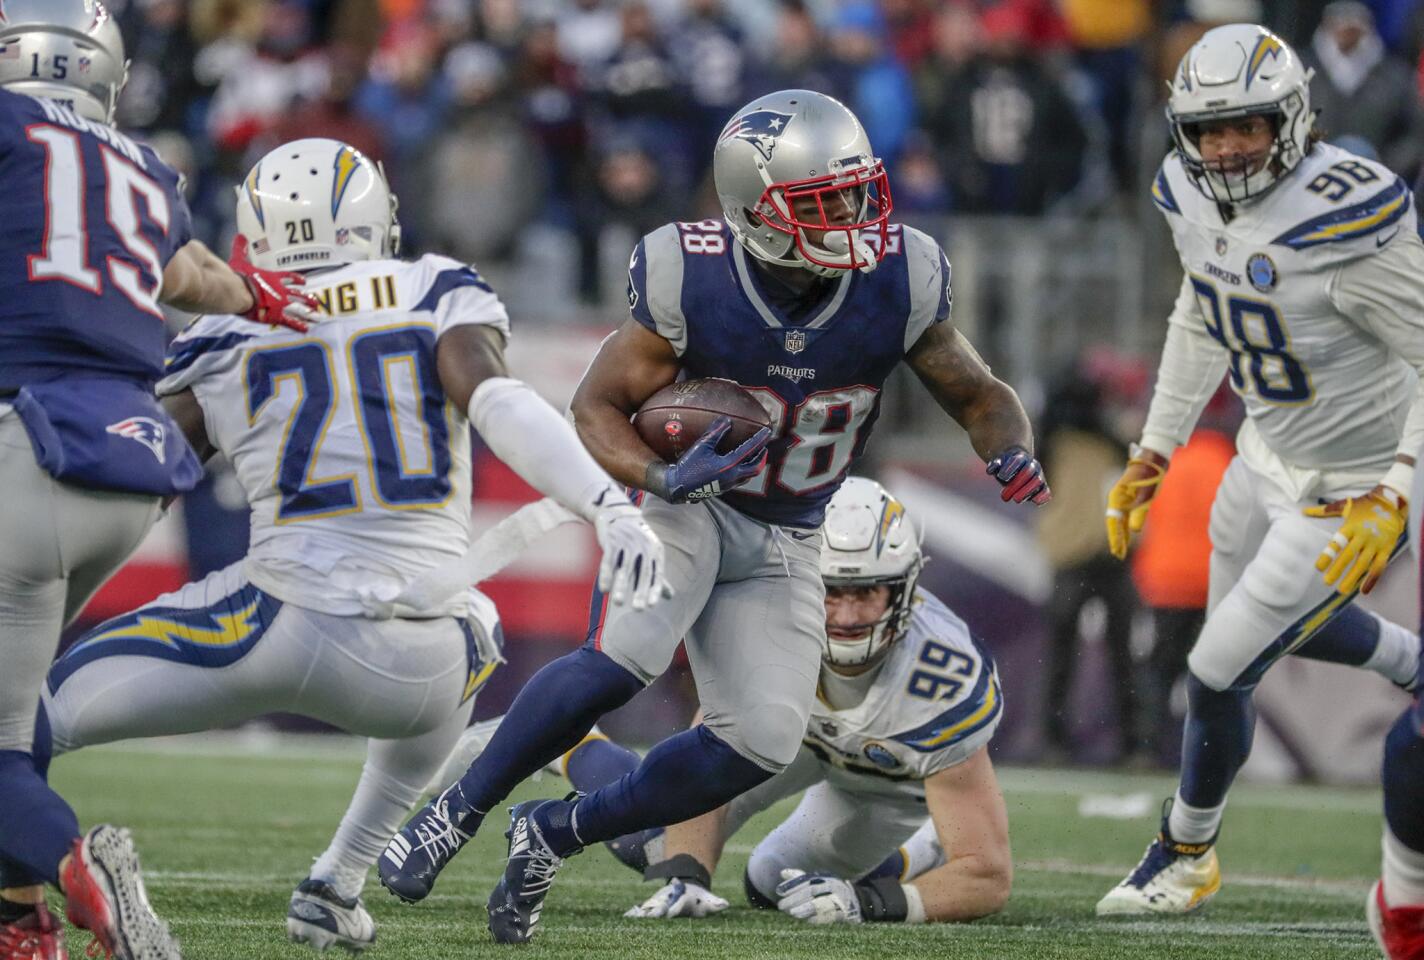 New England Patriots running back James White heads upfield on a screen pass late in the game against the Chargers in the NFL AFC Divisional Playoff at Gillette Stadium on Sunday.